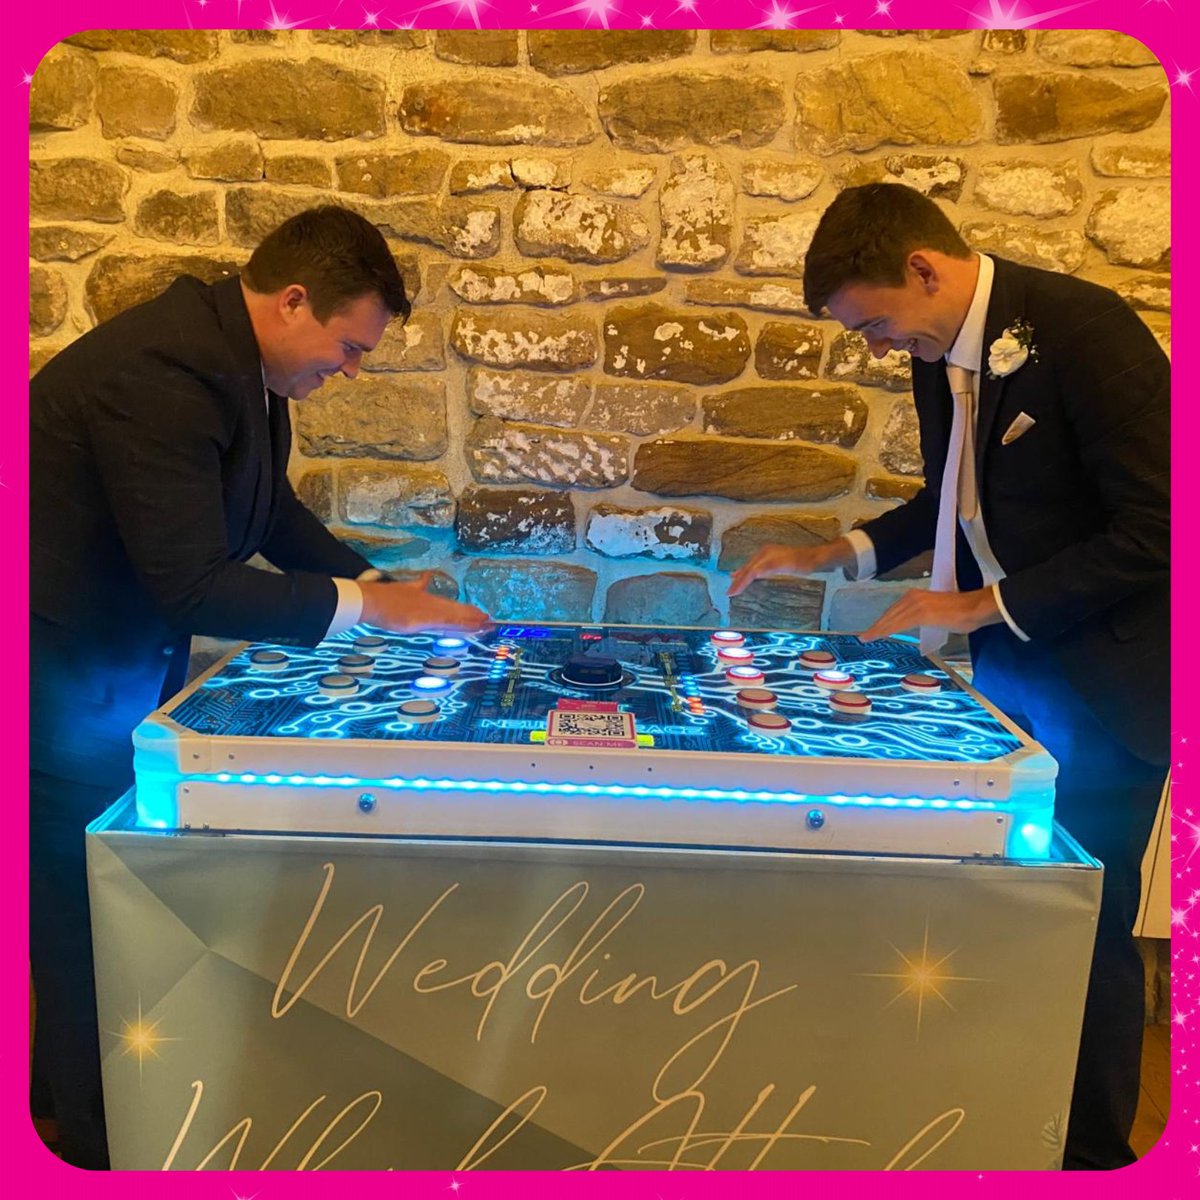 Wow, what a night at @DanbyCastle! 💫 Our whack attack, shuffleboard, and blackjack casino tables were a huge hit! 🎉 

Congrats to the newlyweds 💍

#DanbyCastle #WeddingNight #WeddingFun #WhackAttack #ShuffleboardShuffle #Blackjack